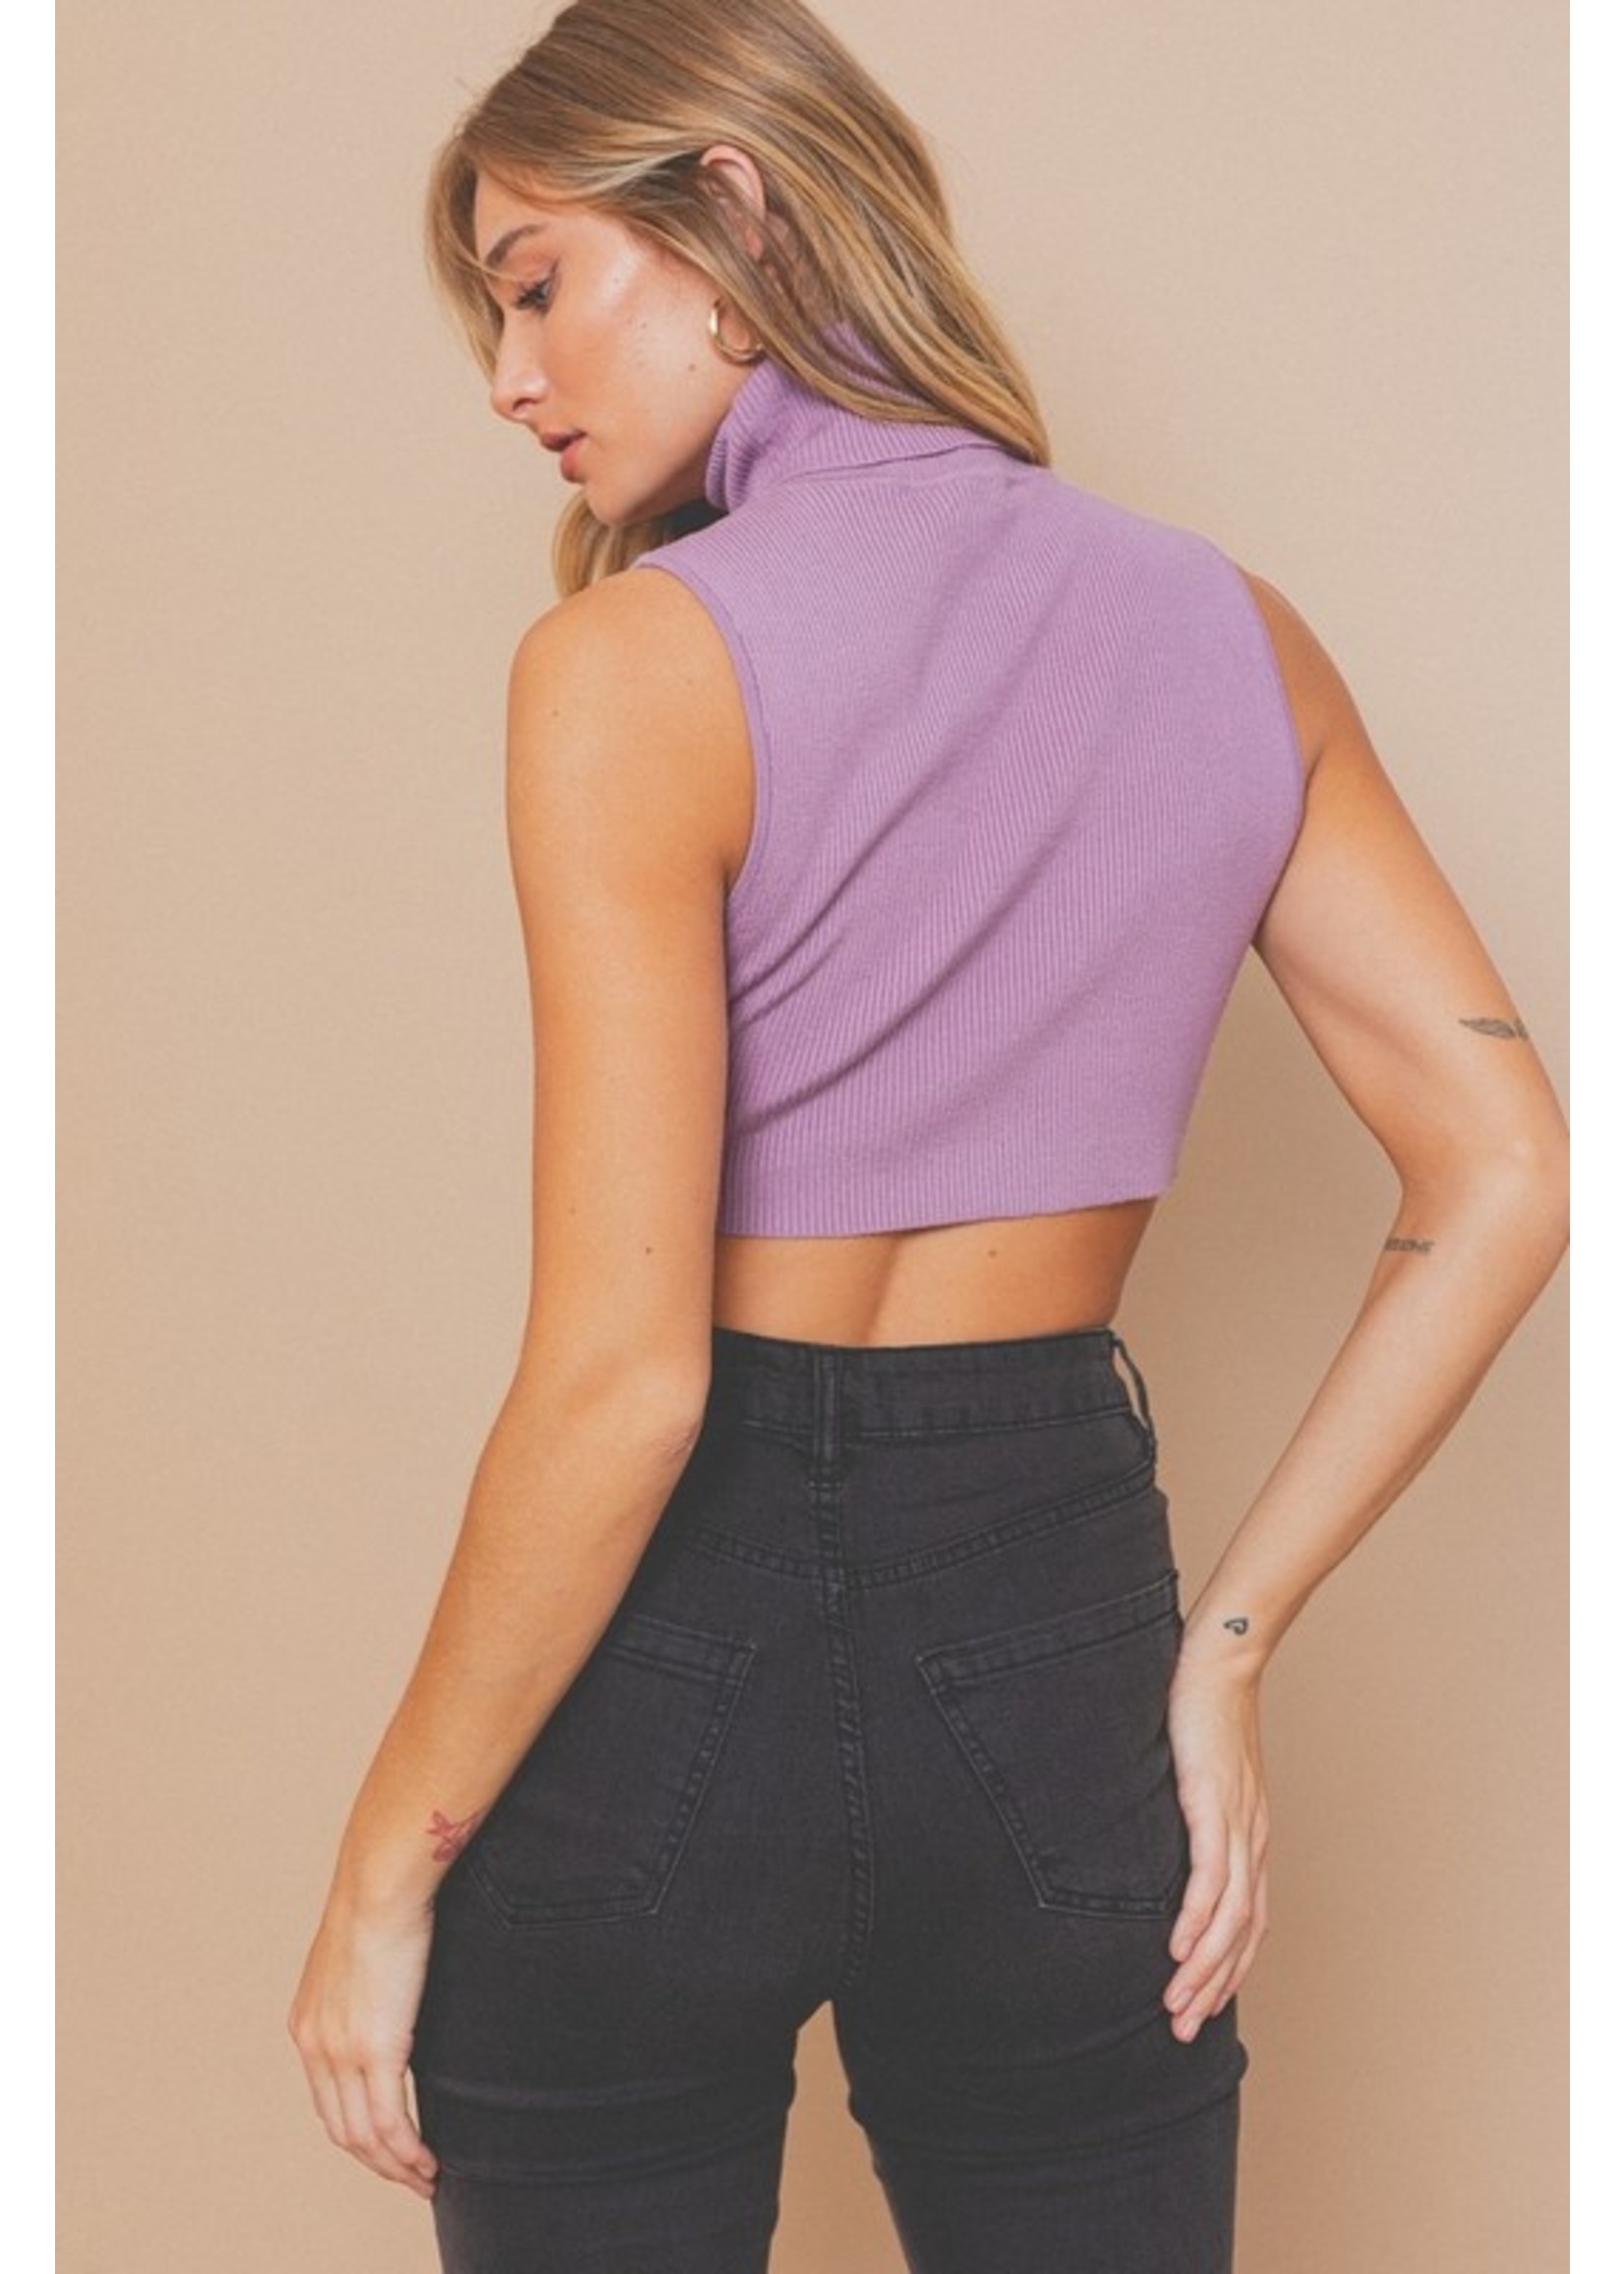 Le Lis Sleeveless Turtle Neck Sweater Crop top - SWT7961